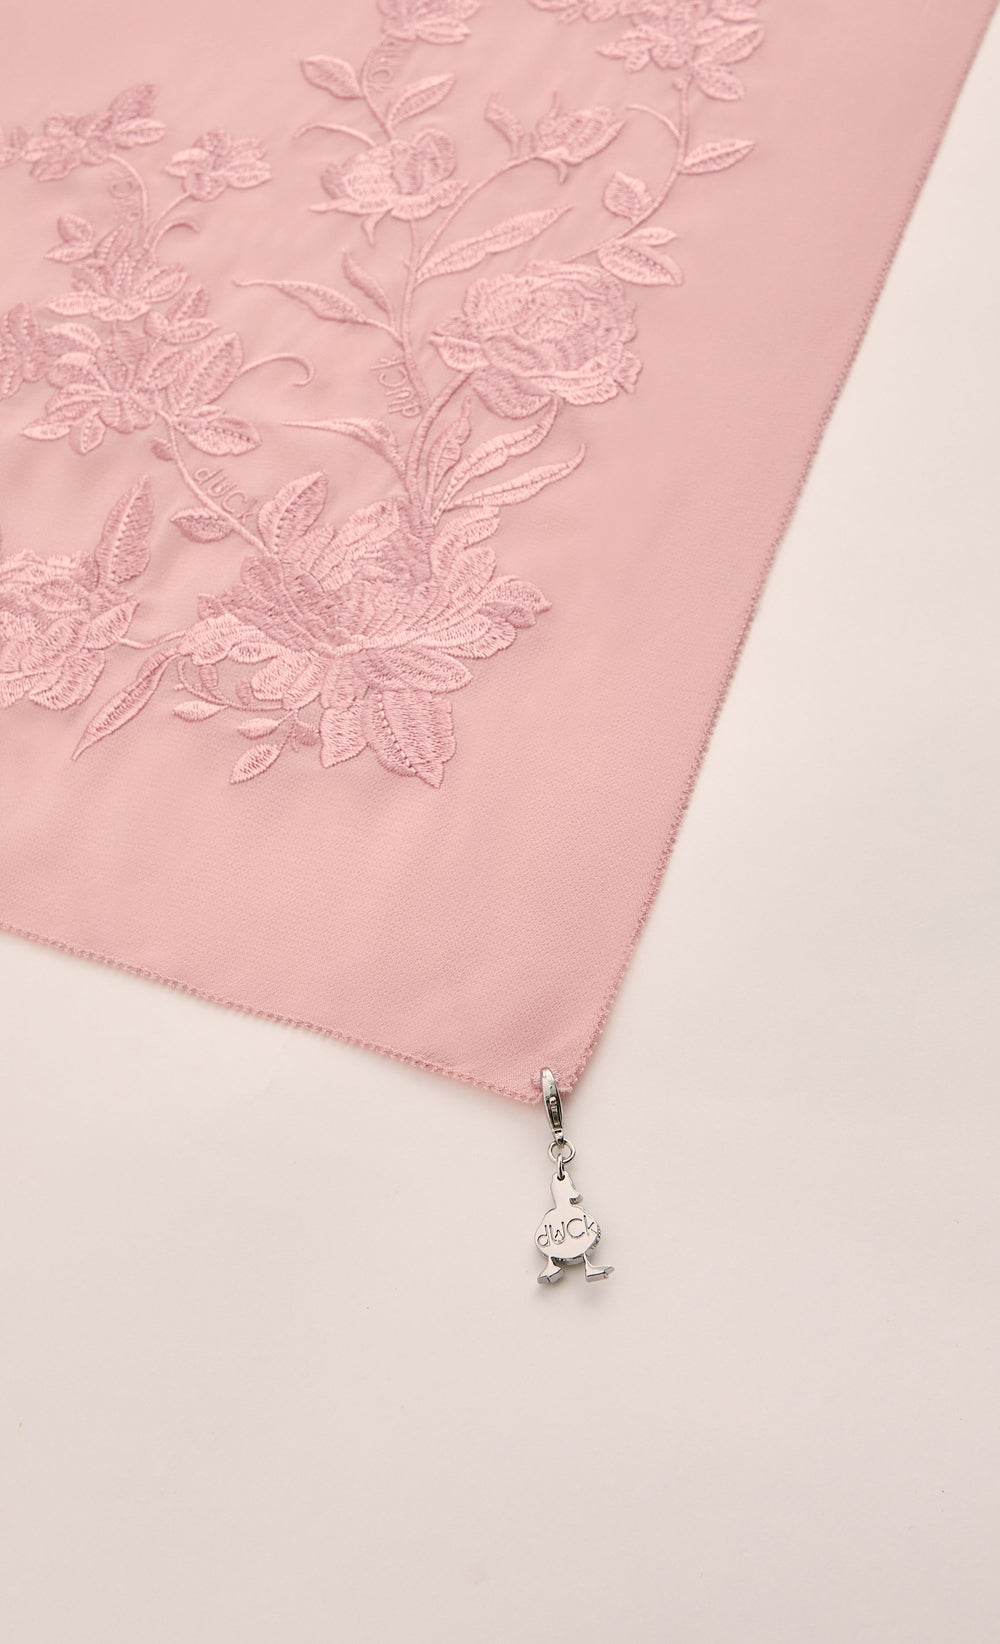 The Peonies Embroidery dUCk Square Scarf in Blush